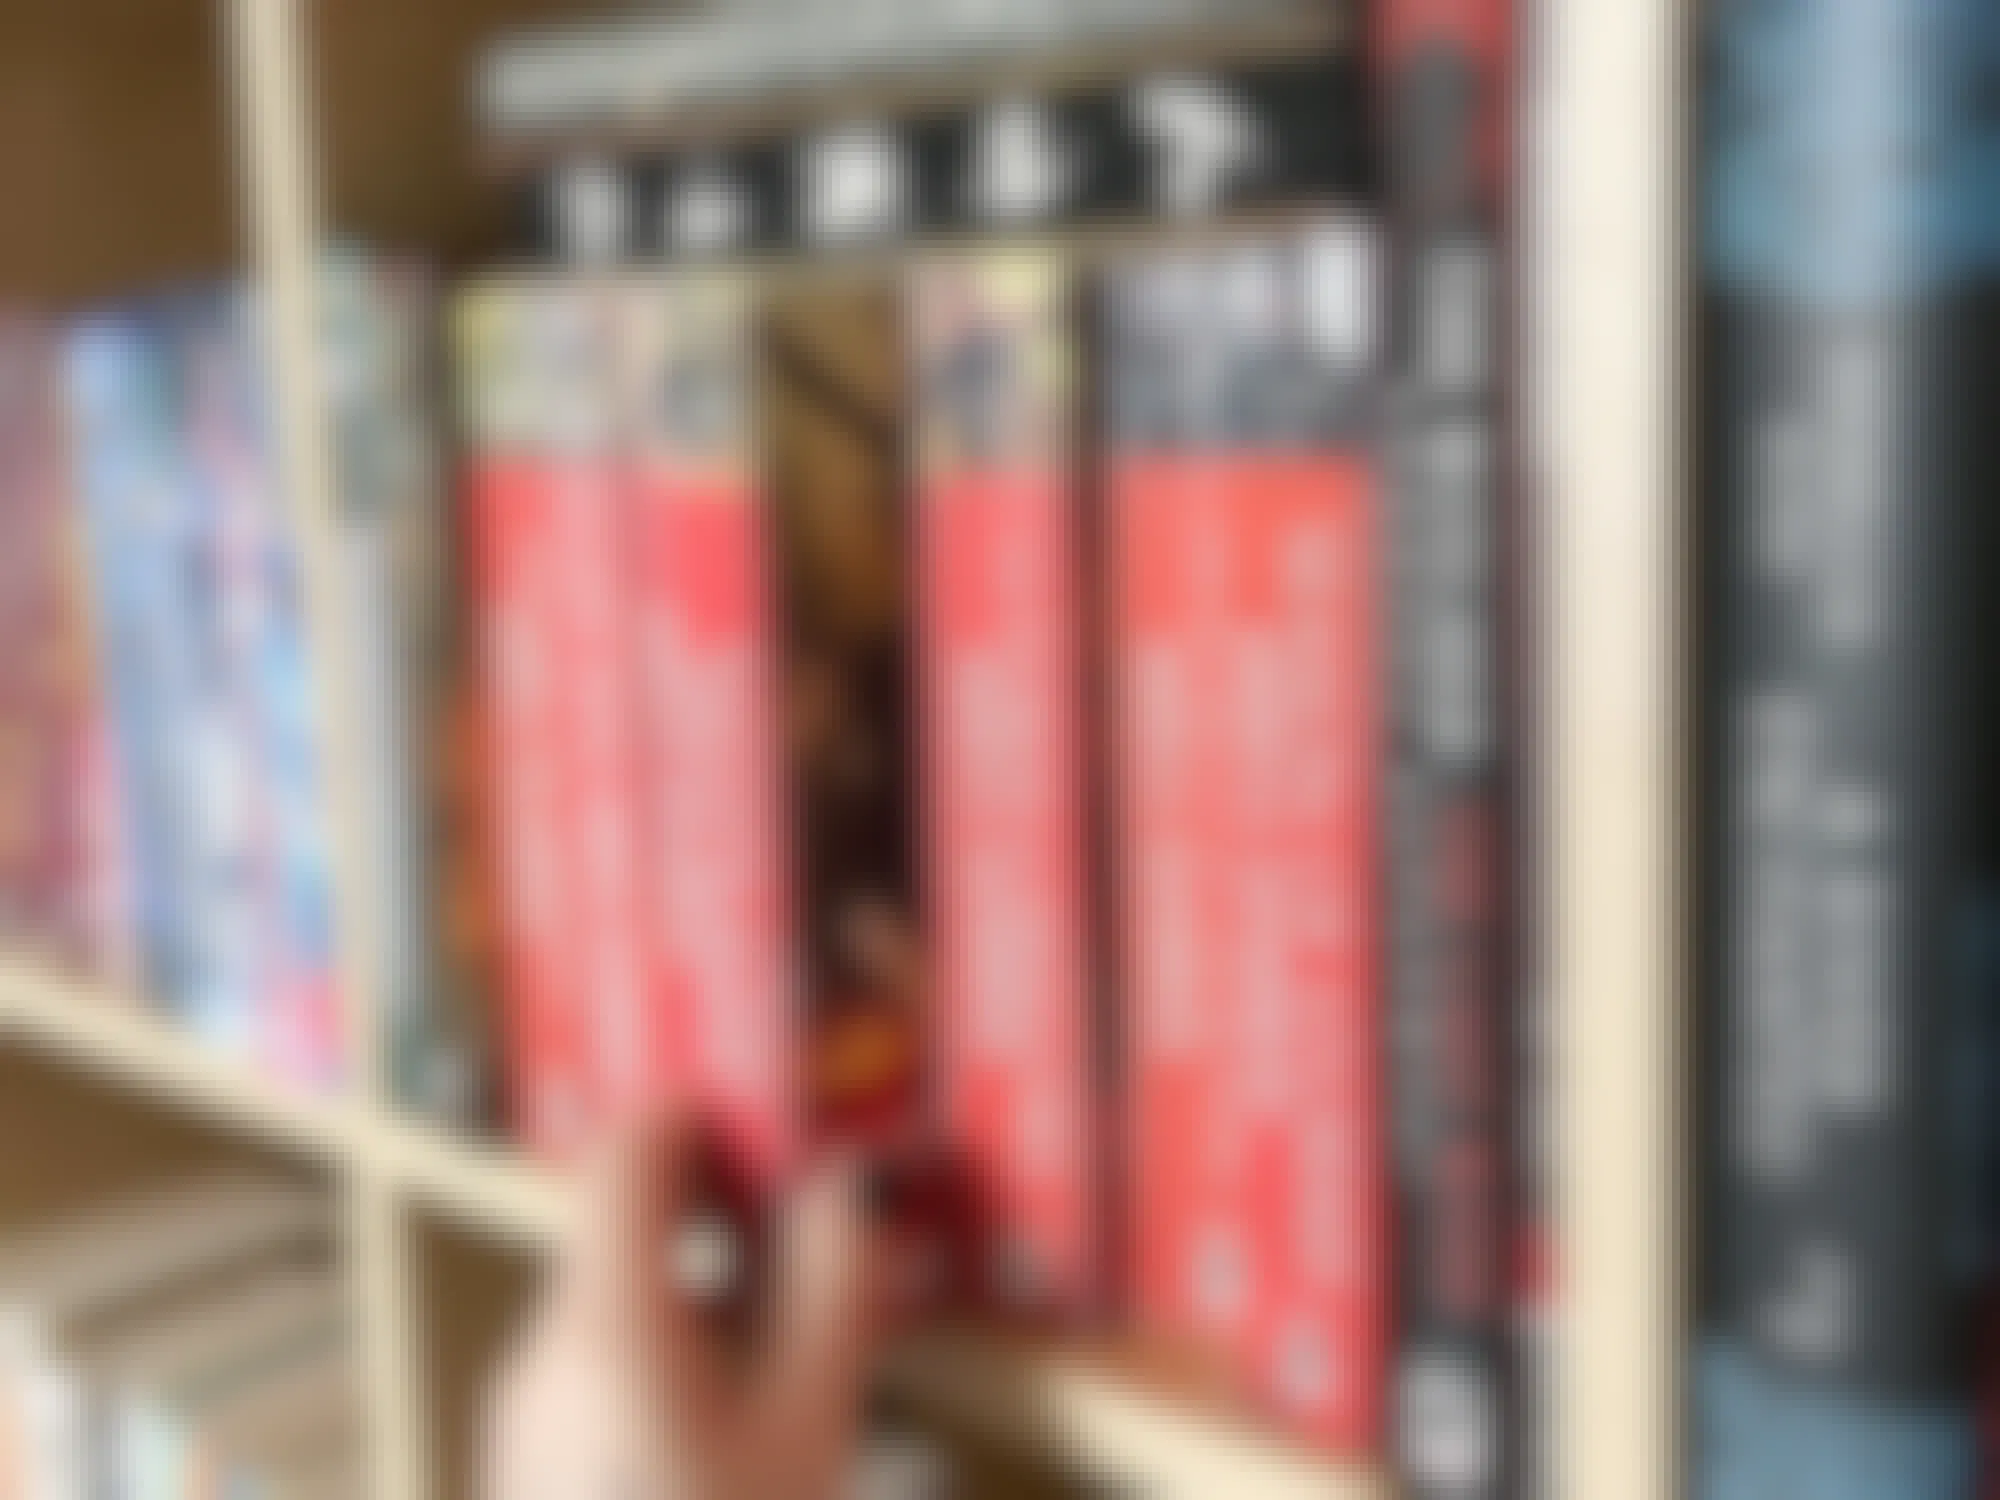 a person reaching for a book on a book shelf